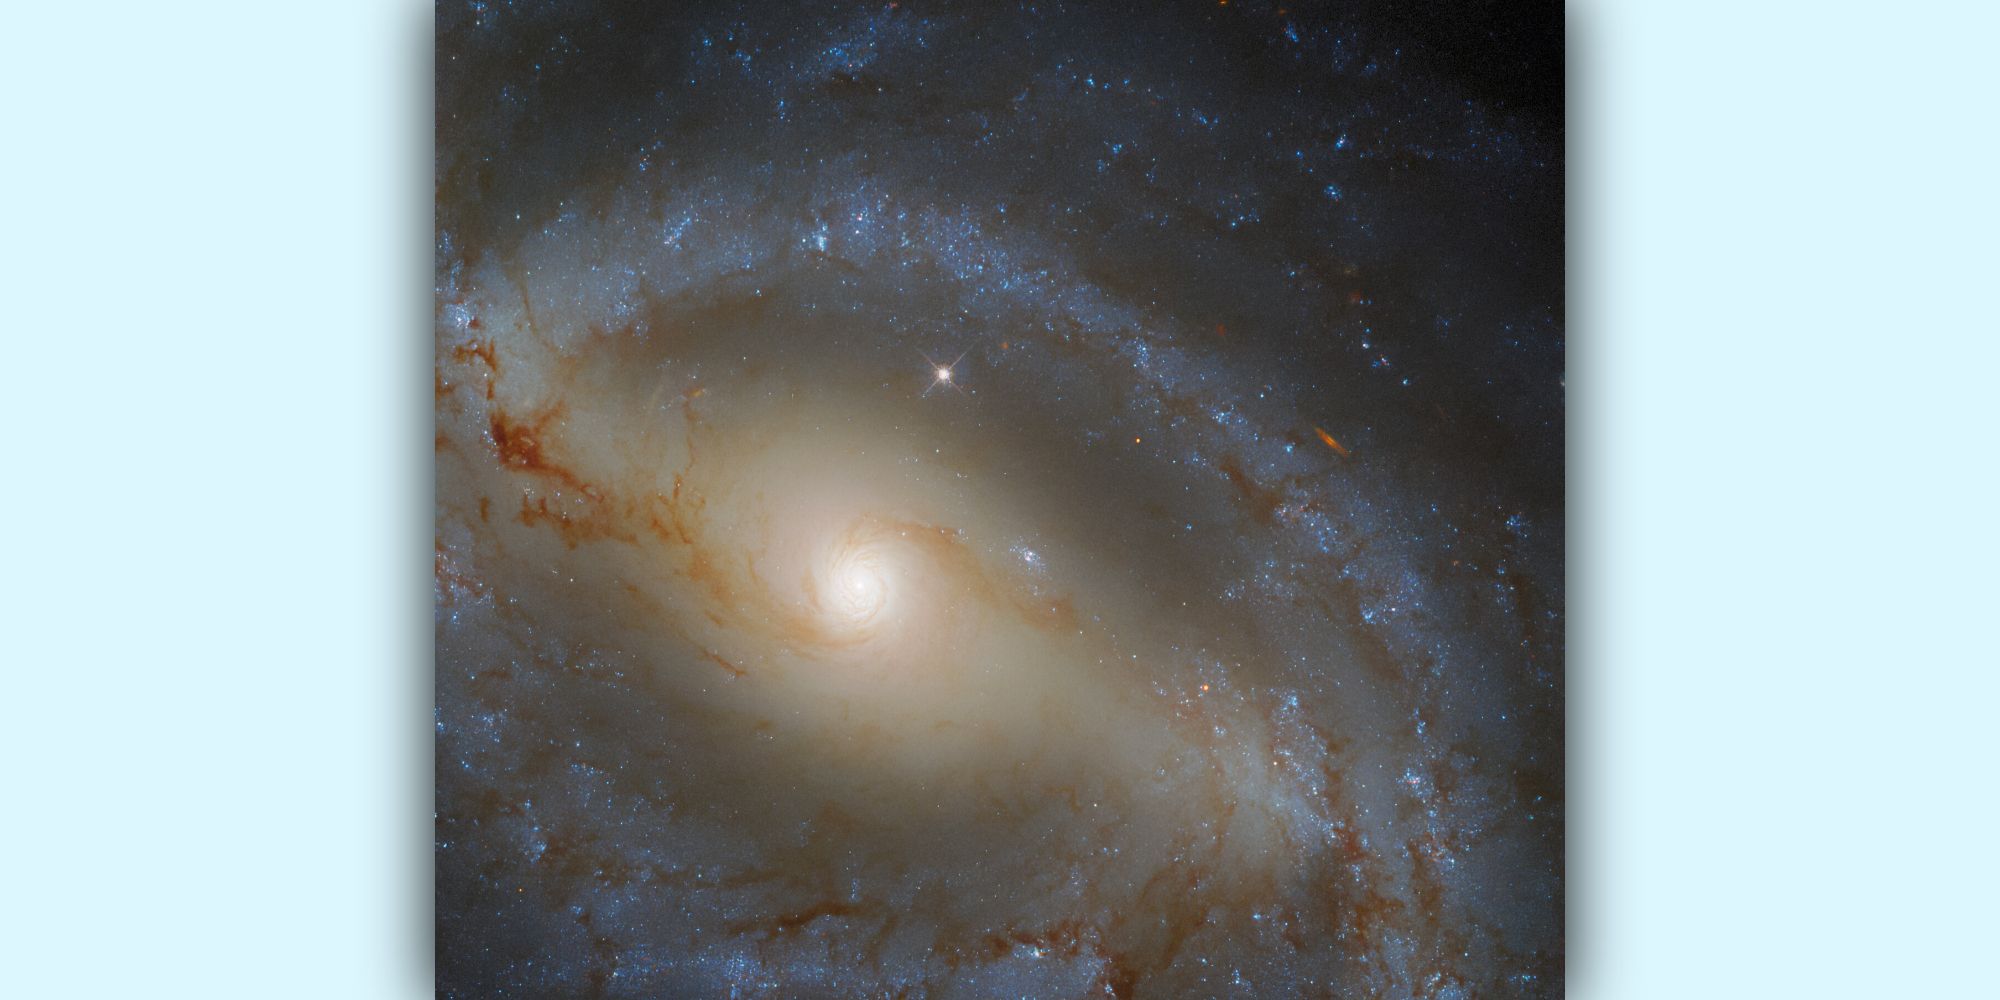 Hubble Spies On A Snake-Like Galaxy Slithering Through Space